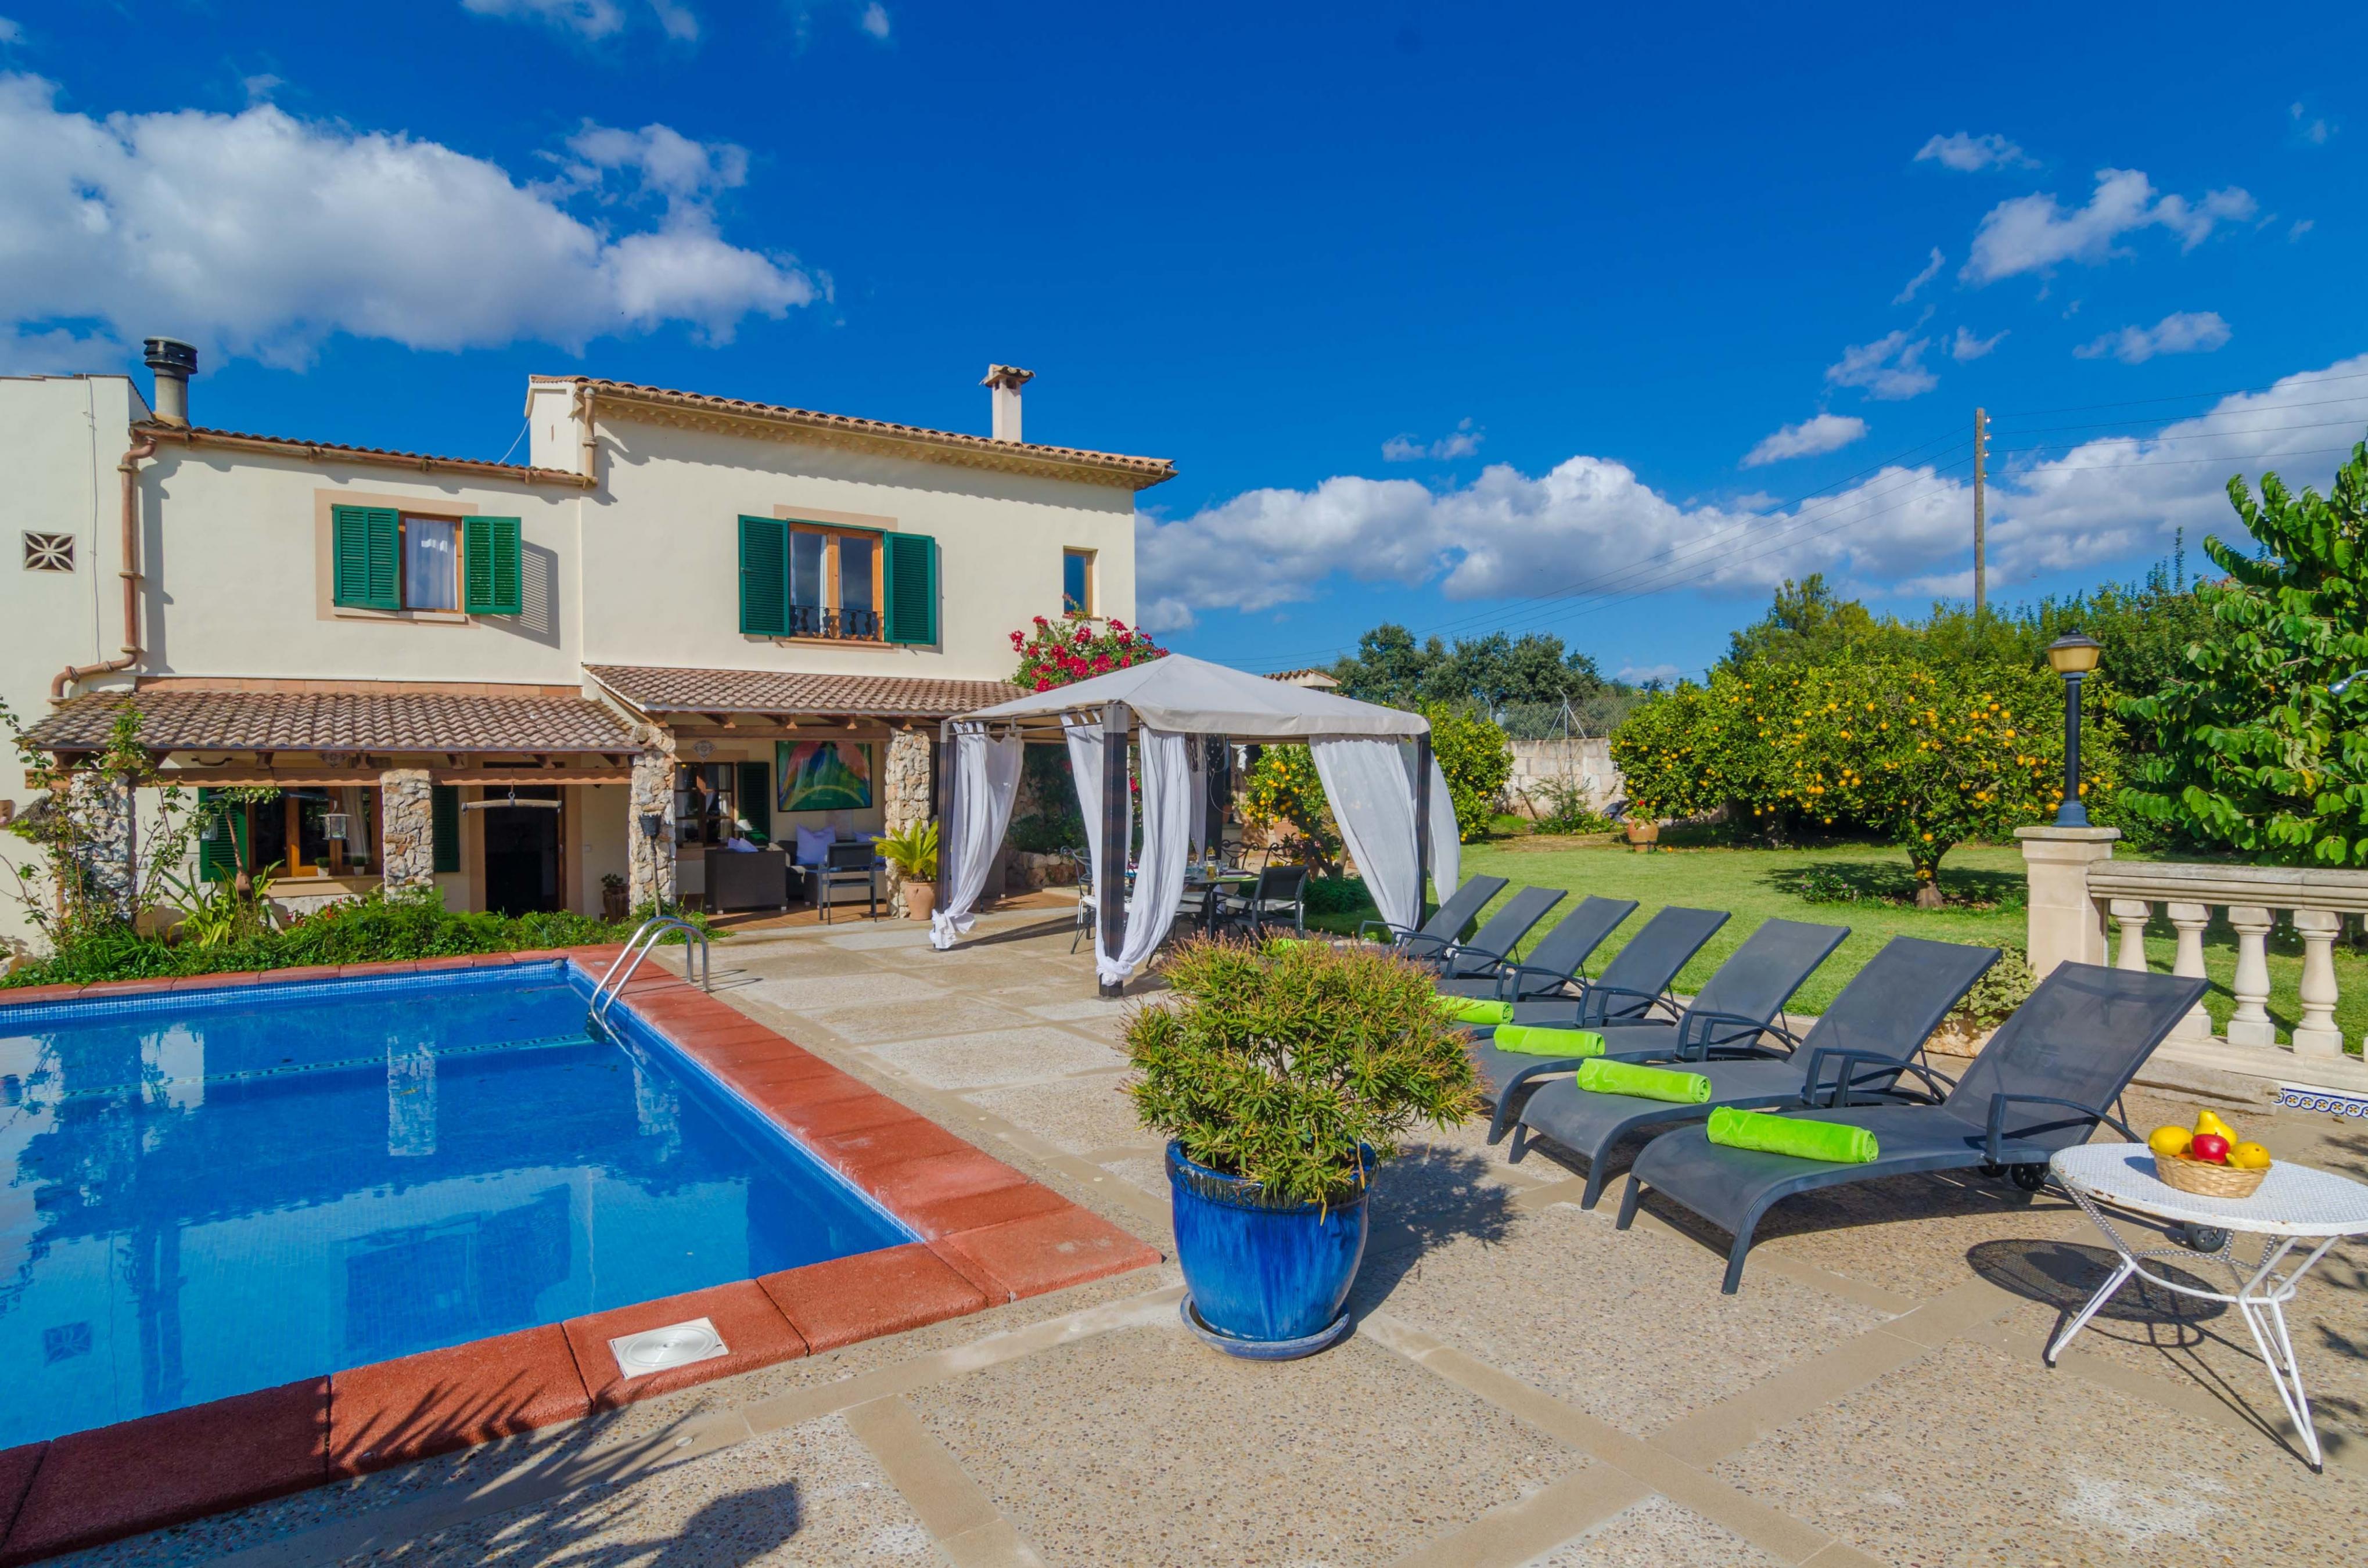 Property Image 2 - CAN RIUS - Villa with private pool in MURO. Free WiFi